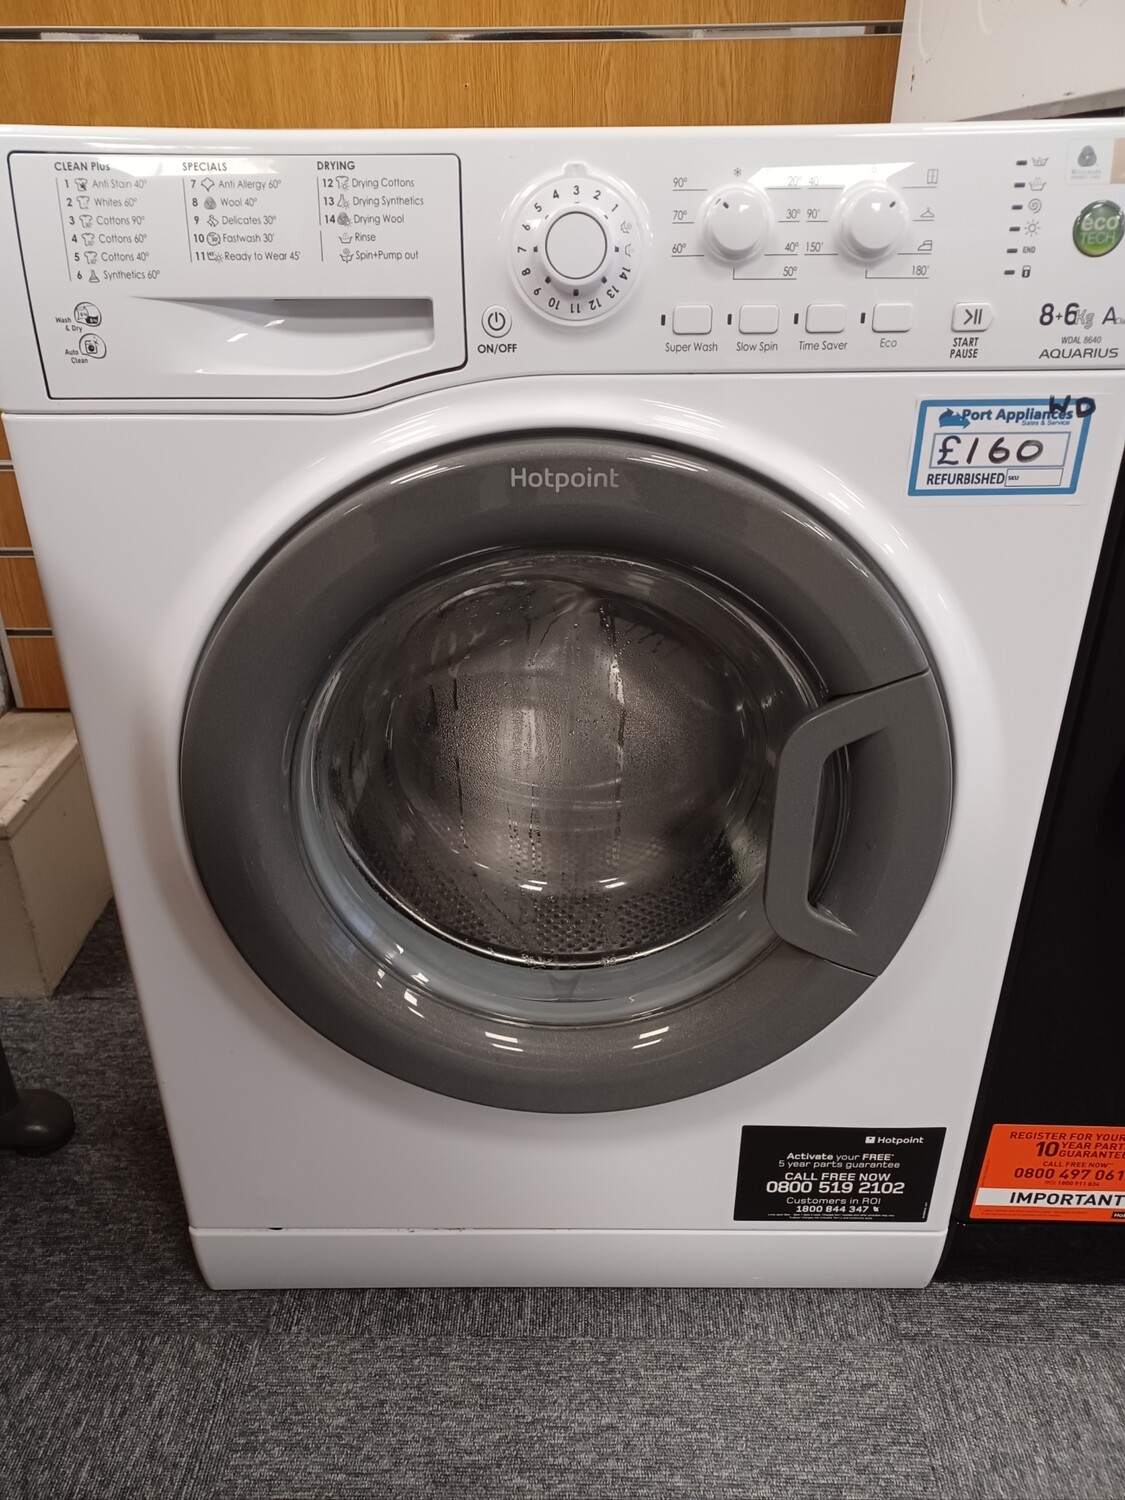 Hotpoint WDAL8640 Washer Dryer 8Kg + 6Kg 1400 Spin Refurbished +6 Months Guarantee. Located In our Whitby Road Shop